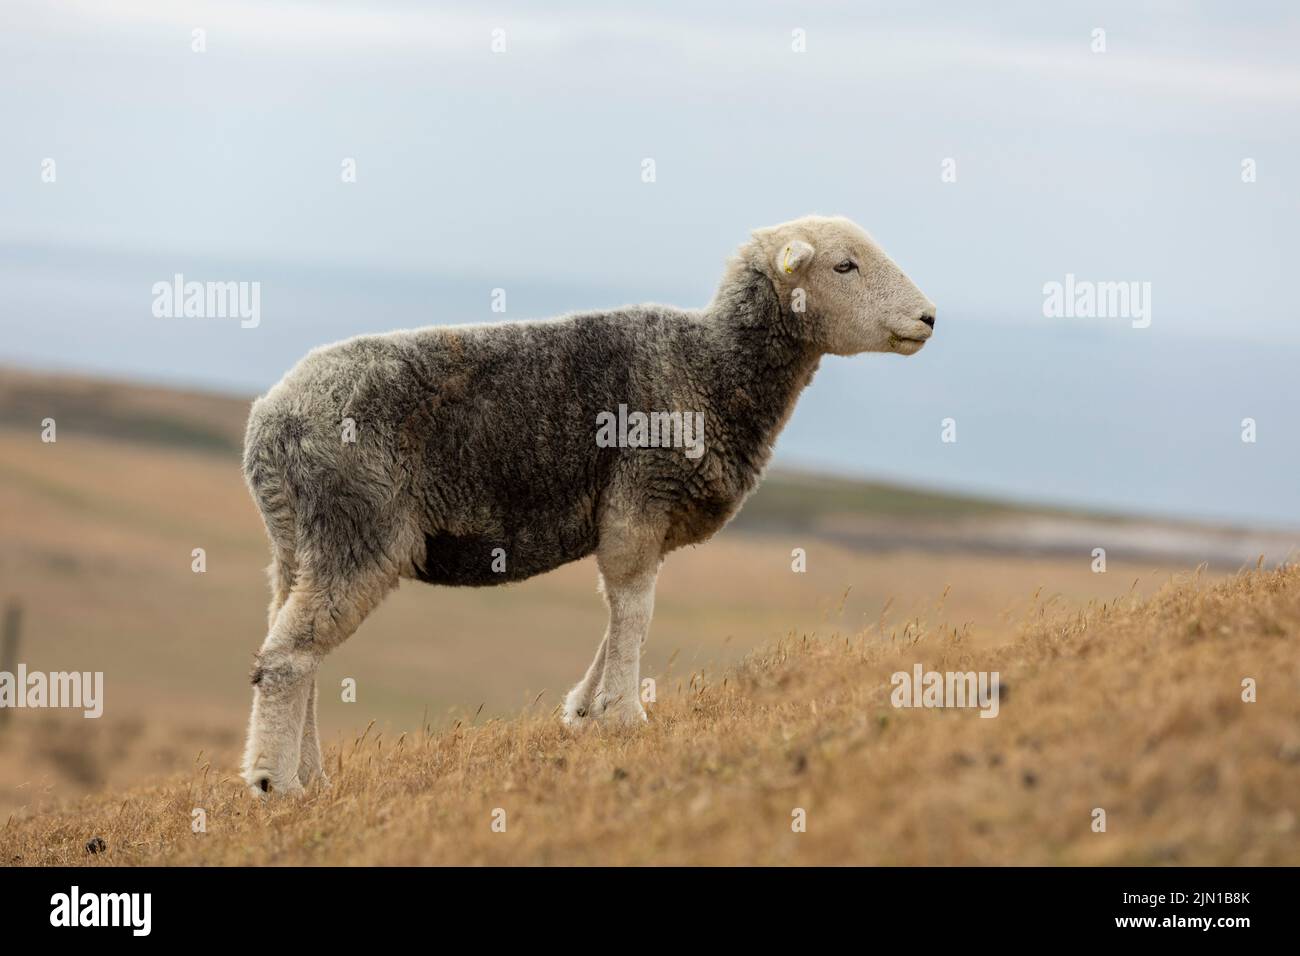 a recently sheared sheep grazing on very dry welsh mountain grass due to recent drought, isolated from background Stock Photo